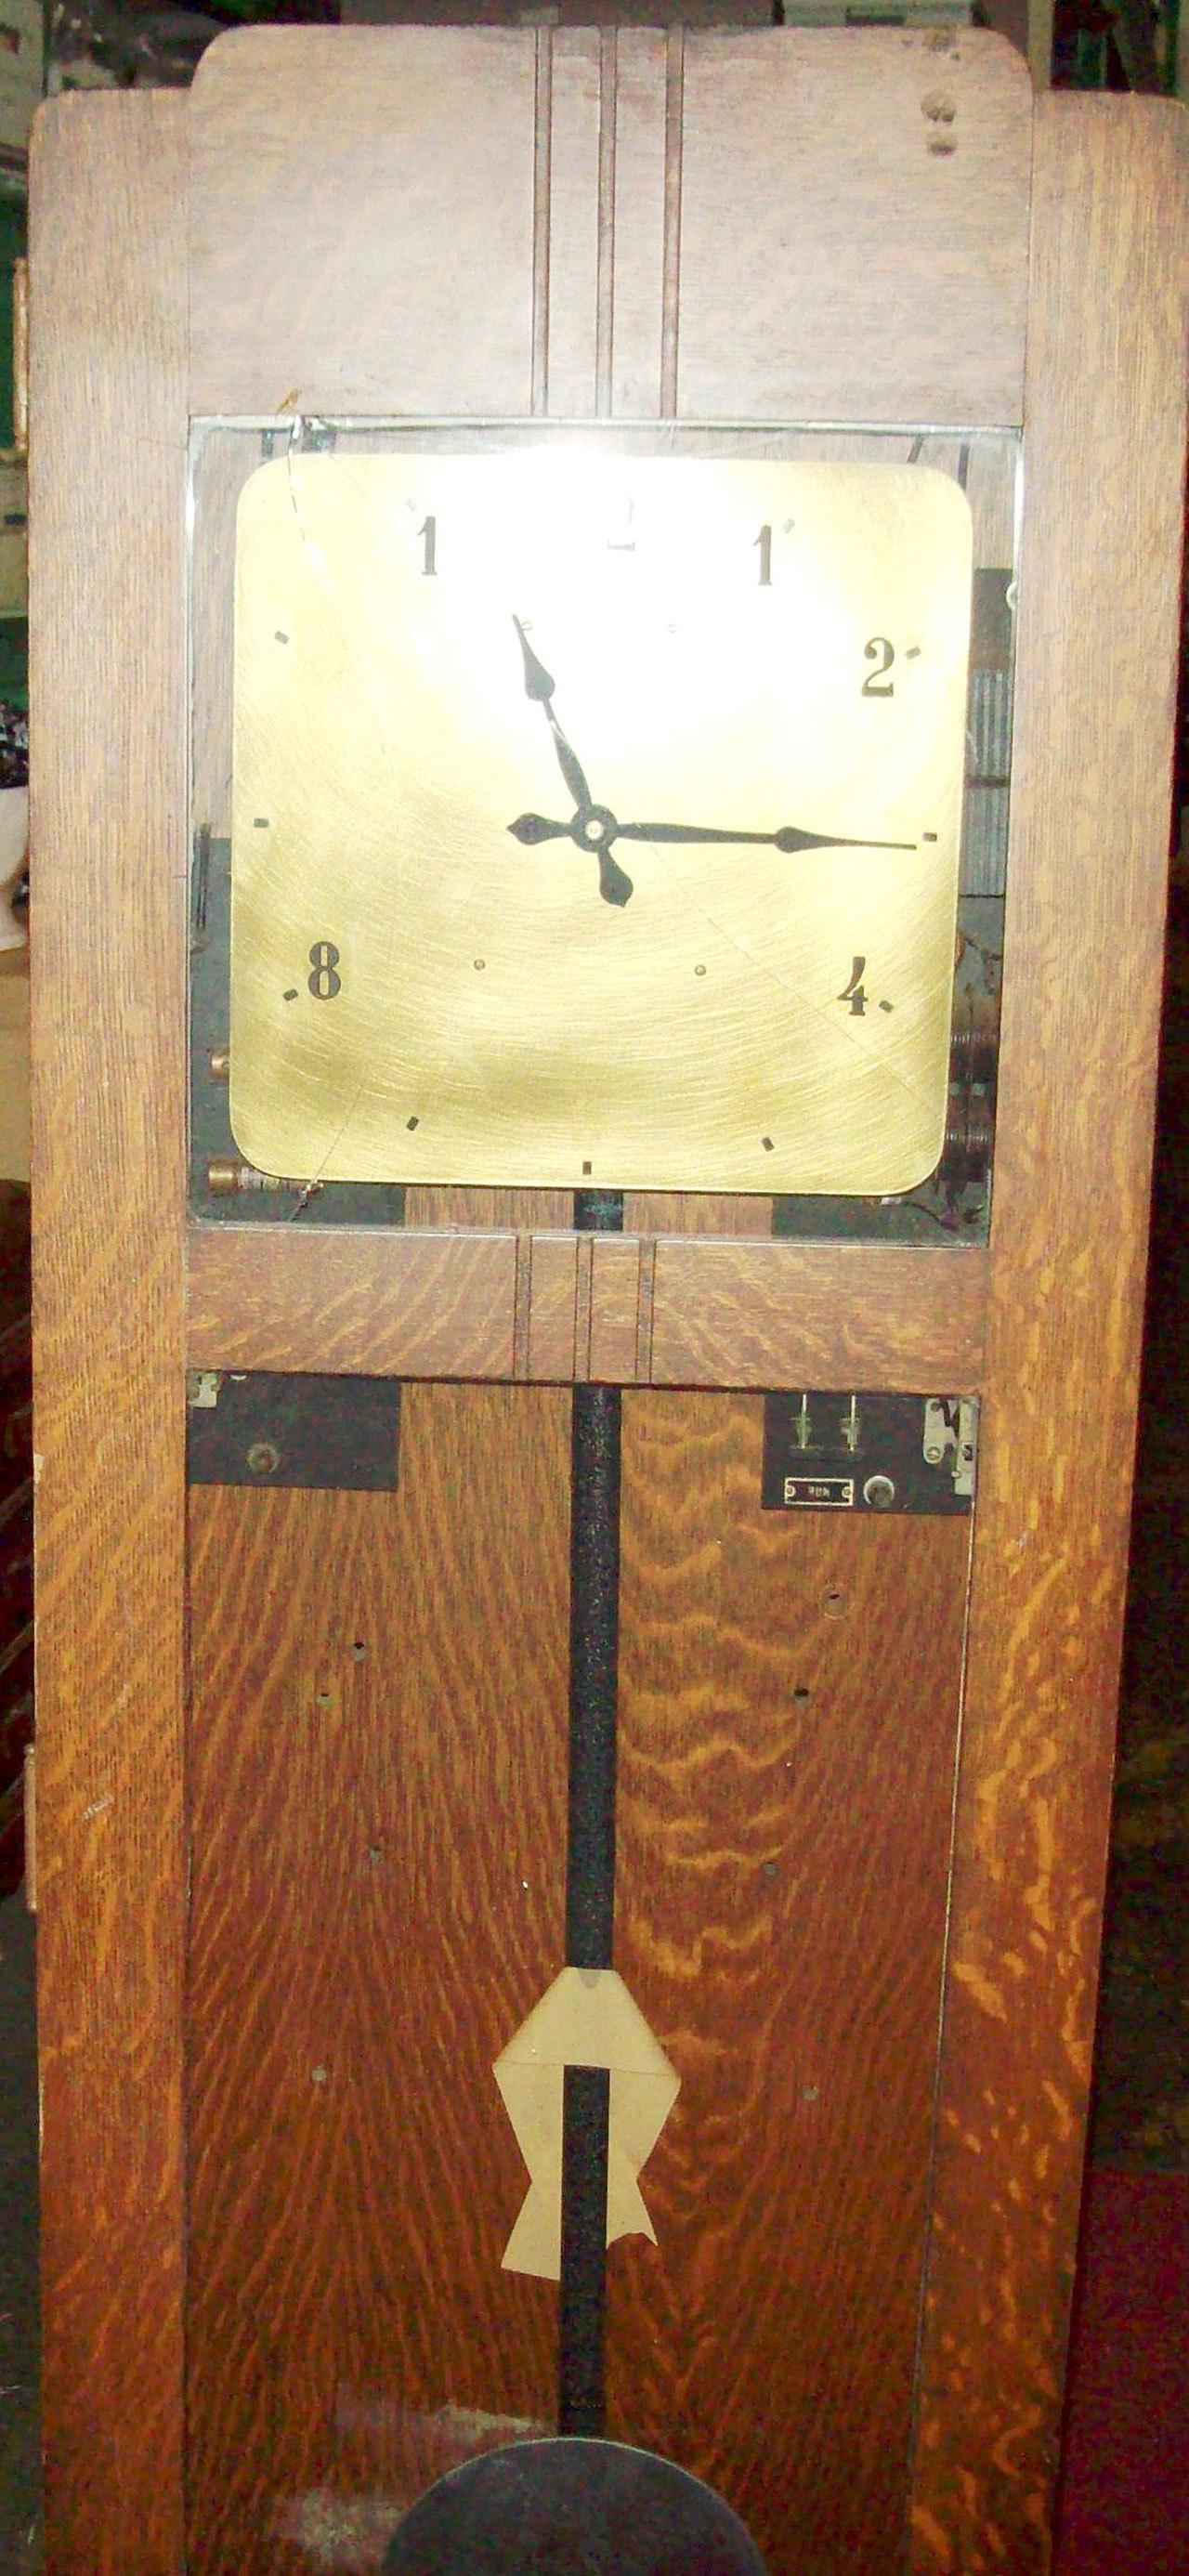 The Rayonier Mill clock, now owned by the Clallam County Historical Society. (Rex Gerberding)